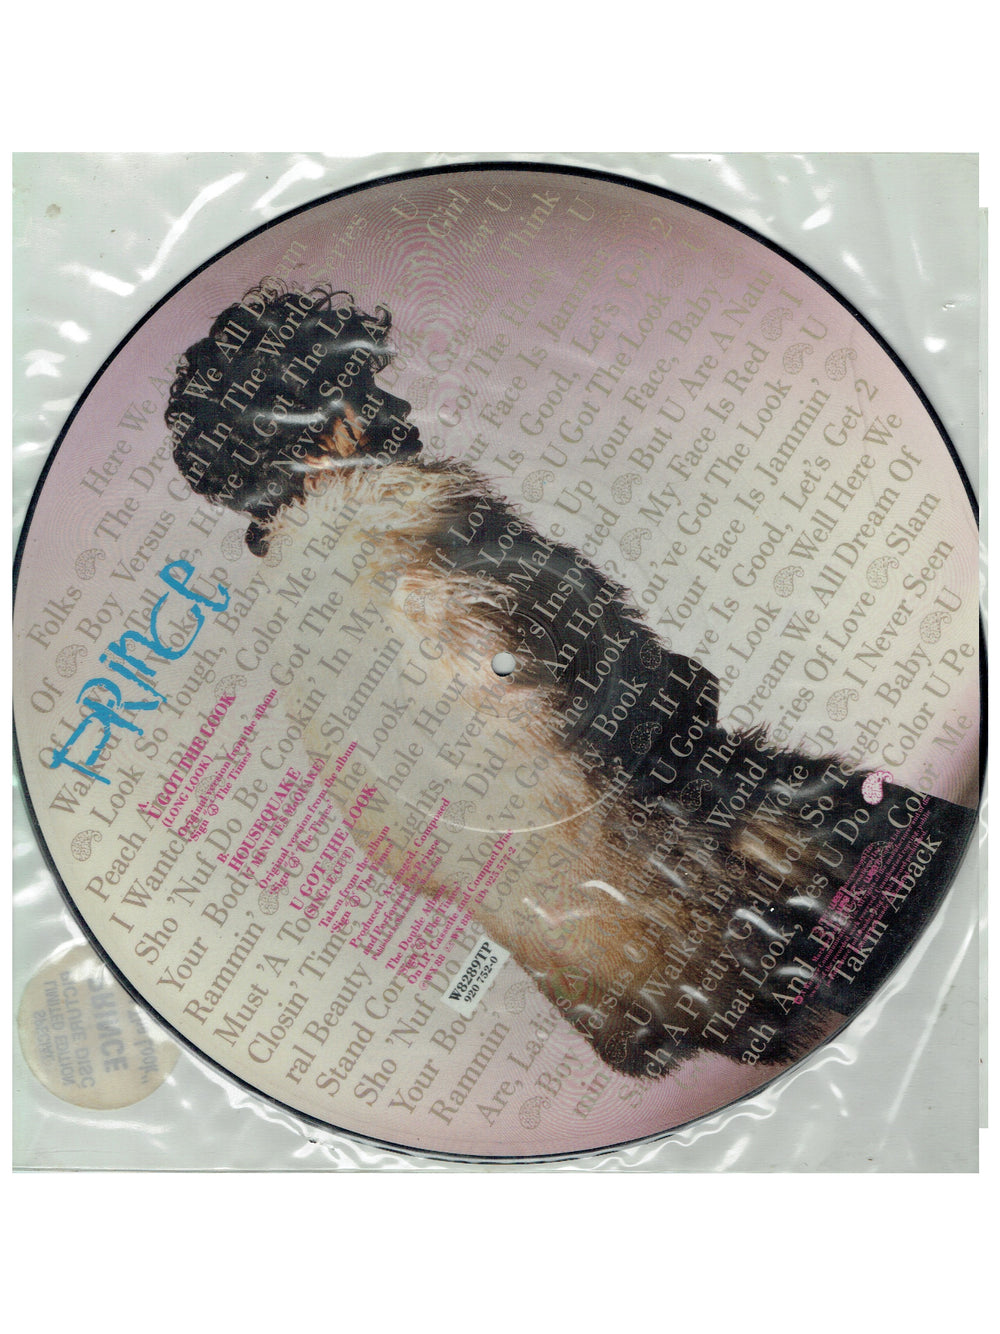 Prince – U Got The Look Vinyl 12" Limited Edition Picture Disc UK & Europe Preloved: 1987